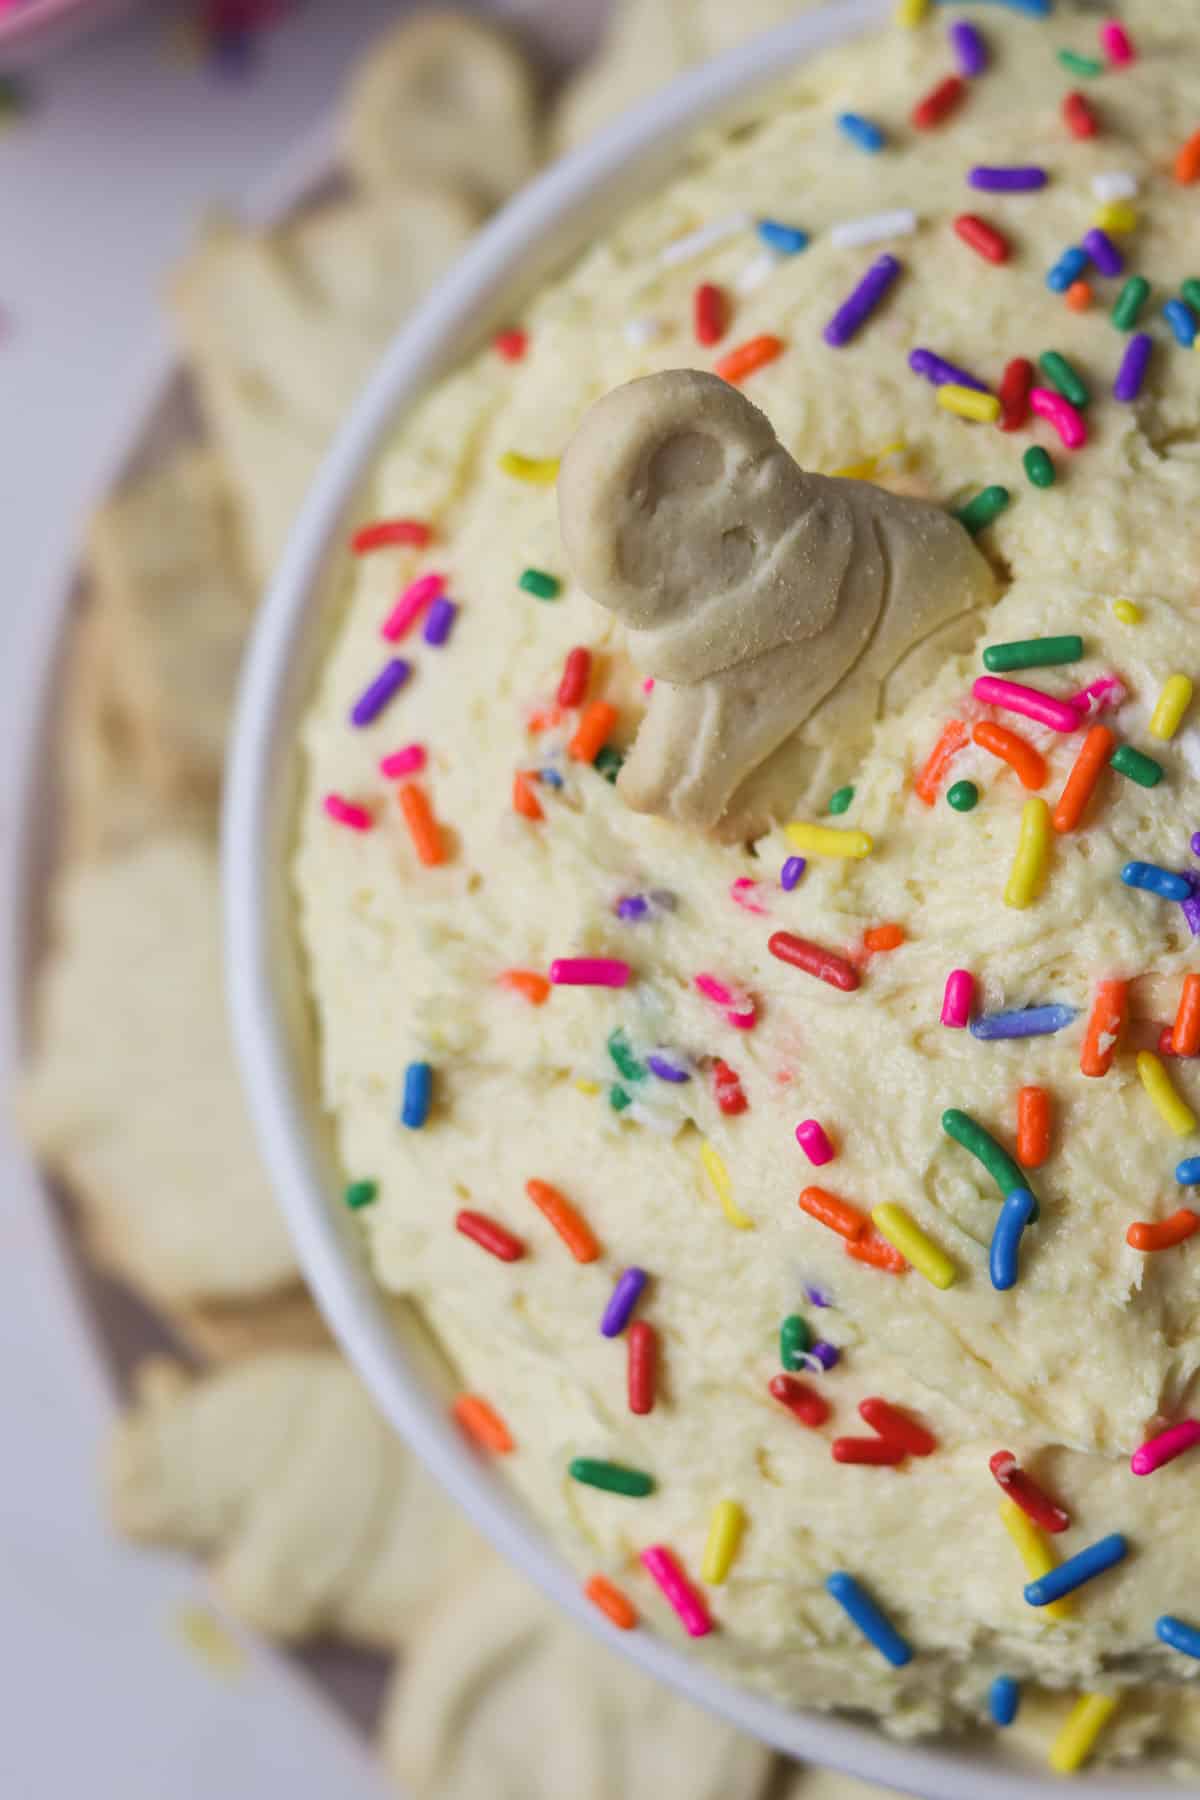 bowl of dunkaroo dip with sprinkles and animal crackers